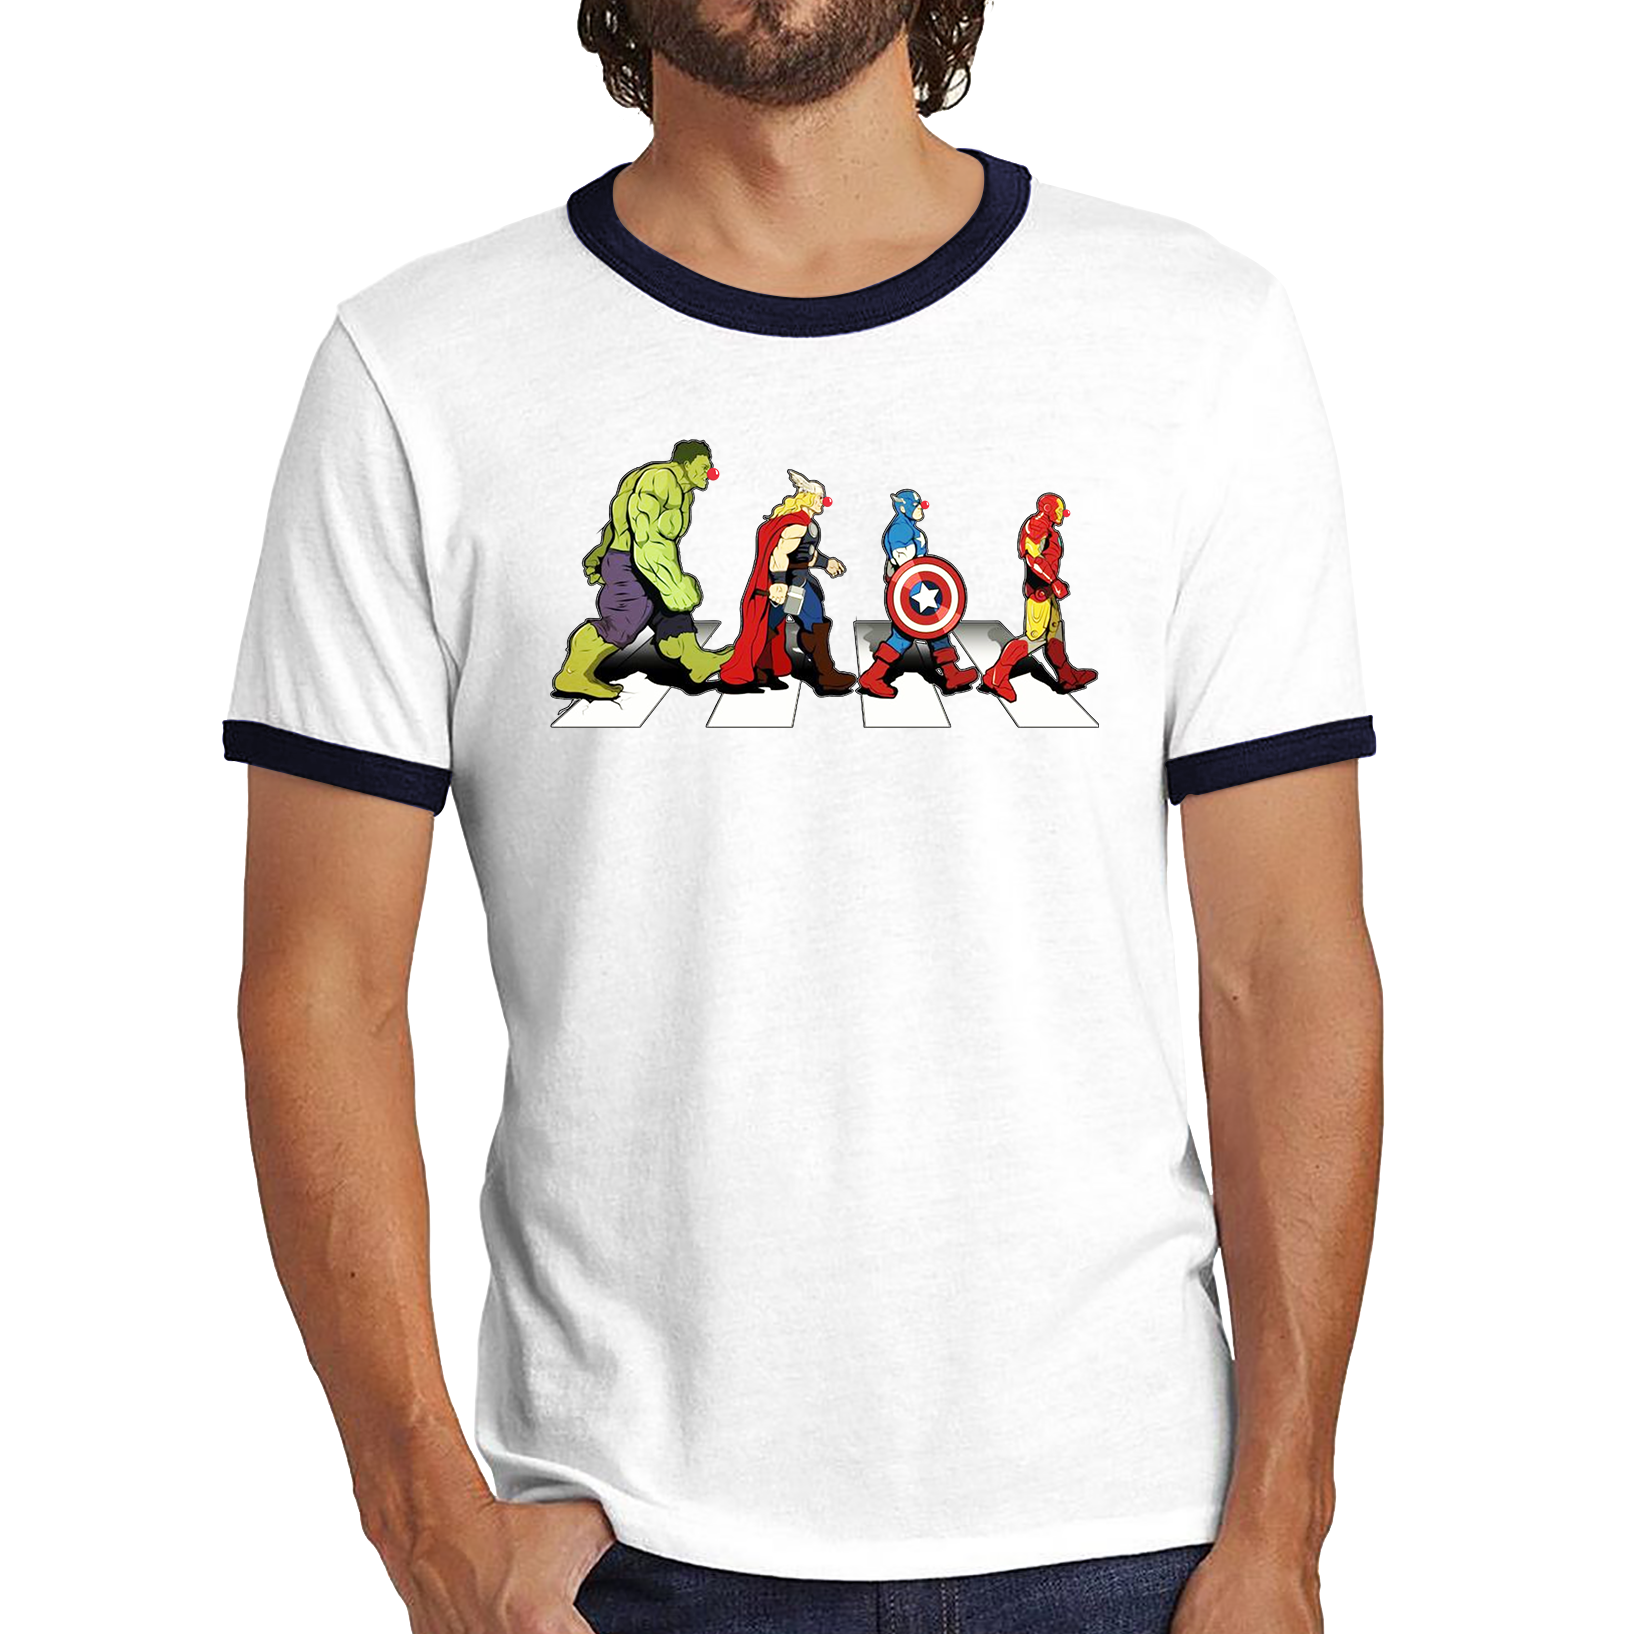 Hulk Thor Captain America Iron Man Marvel Avengers Abbey Road Red Nose Day Ringer T Shirt. 50% Goes To Charity